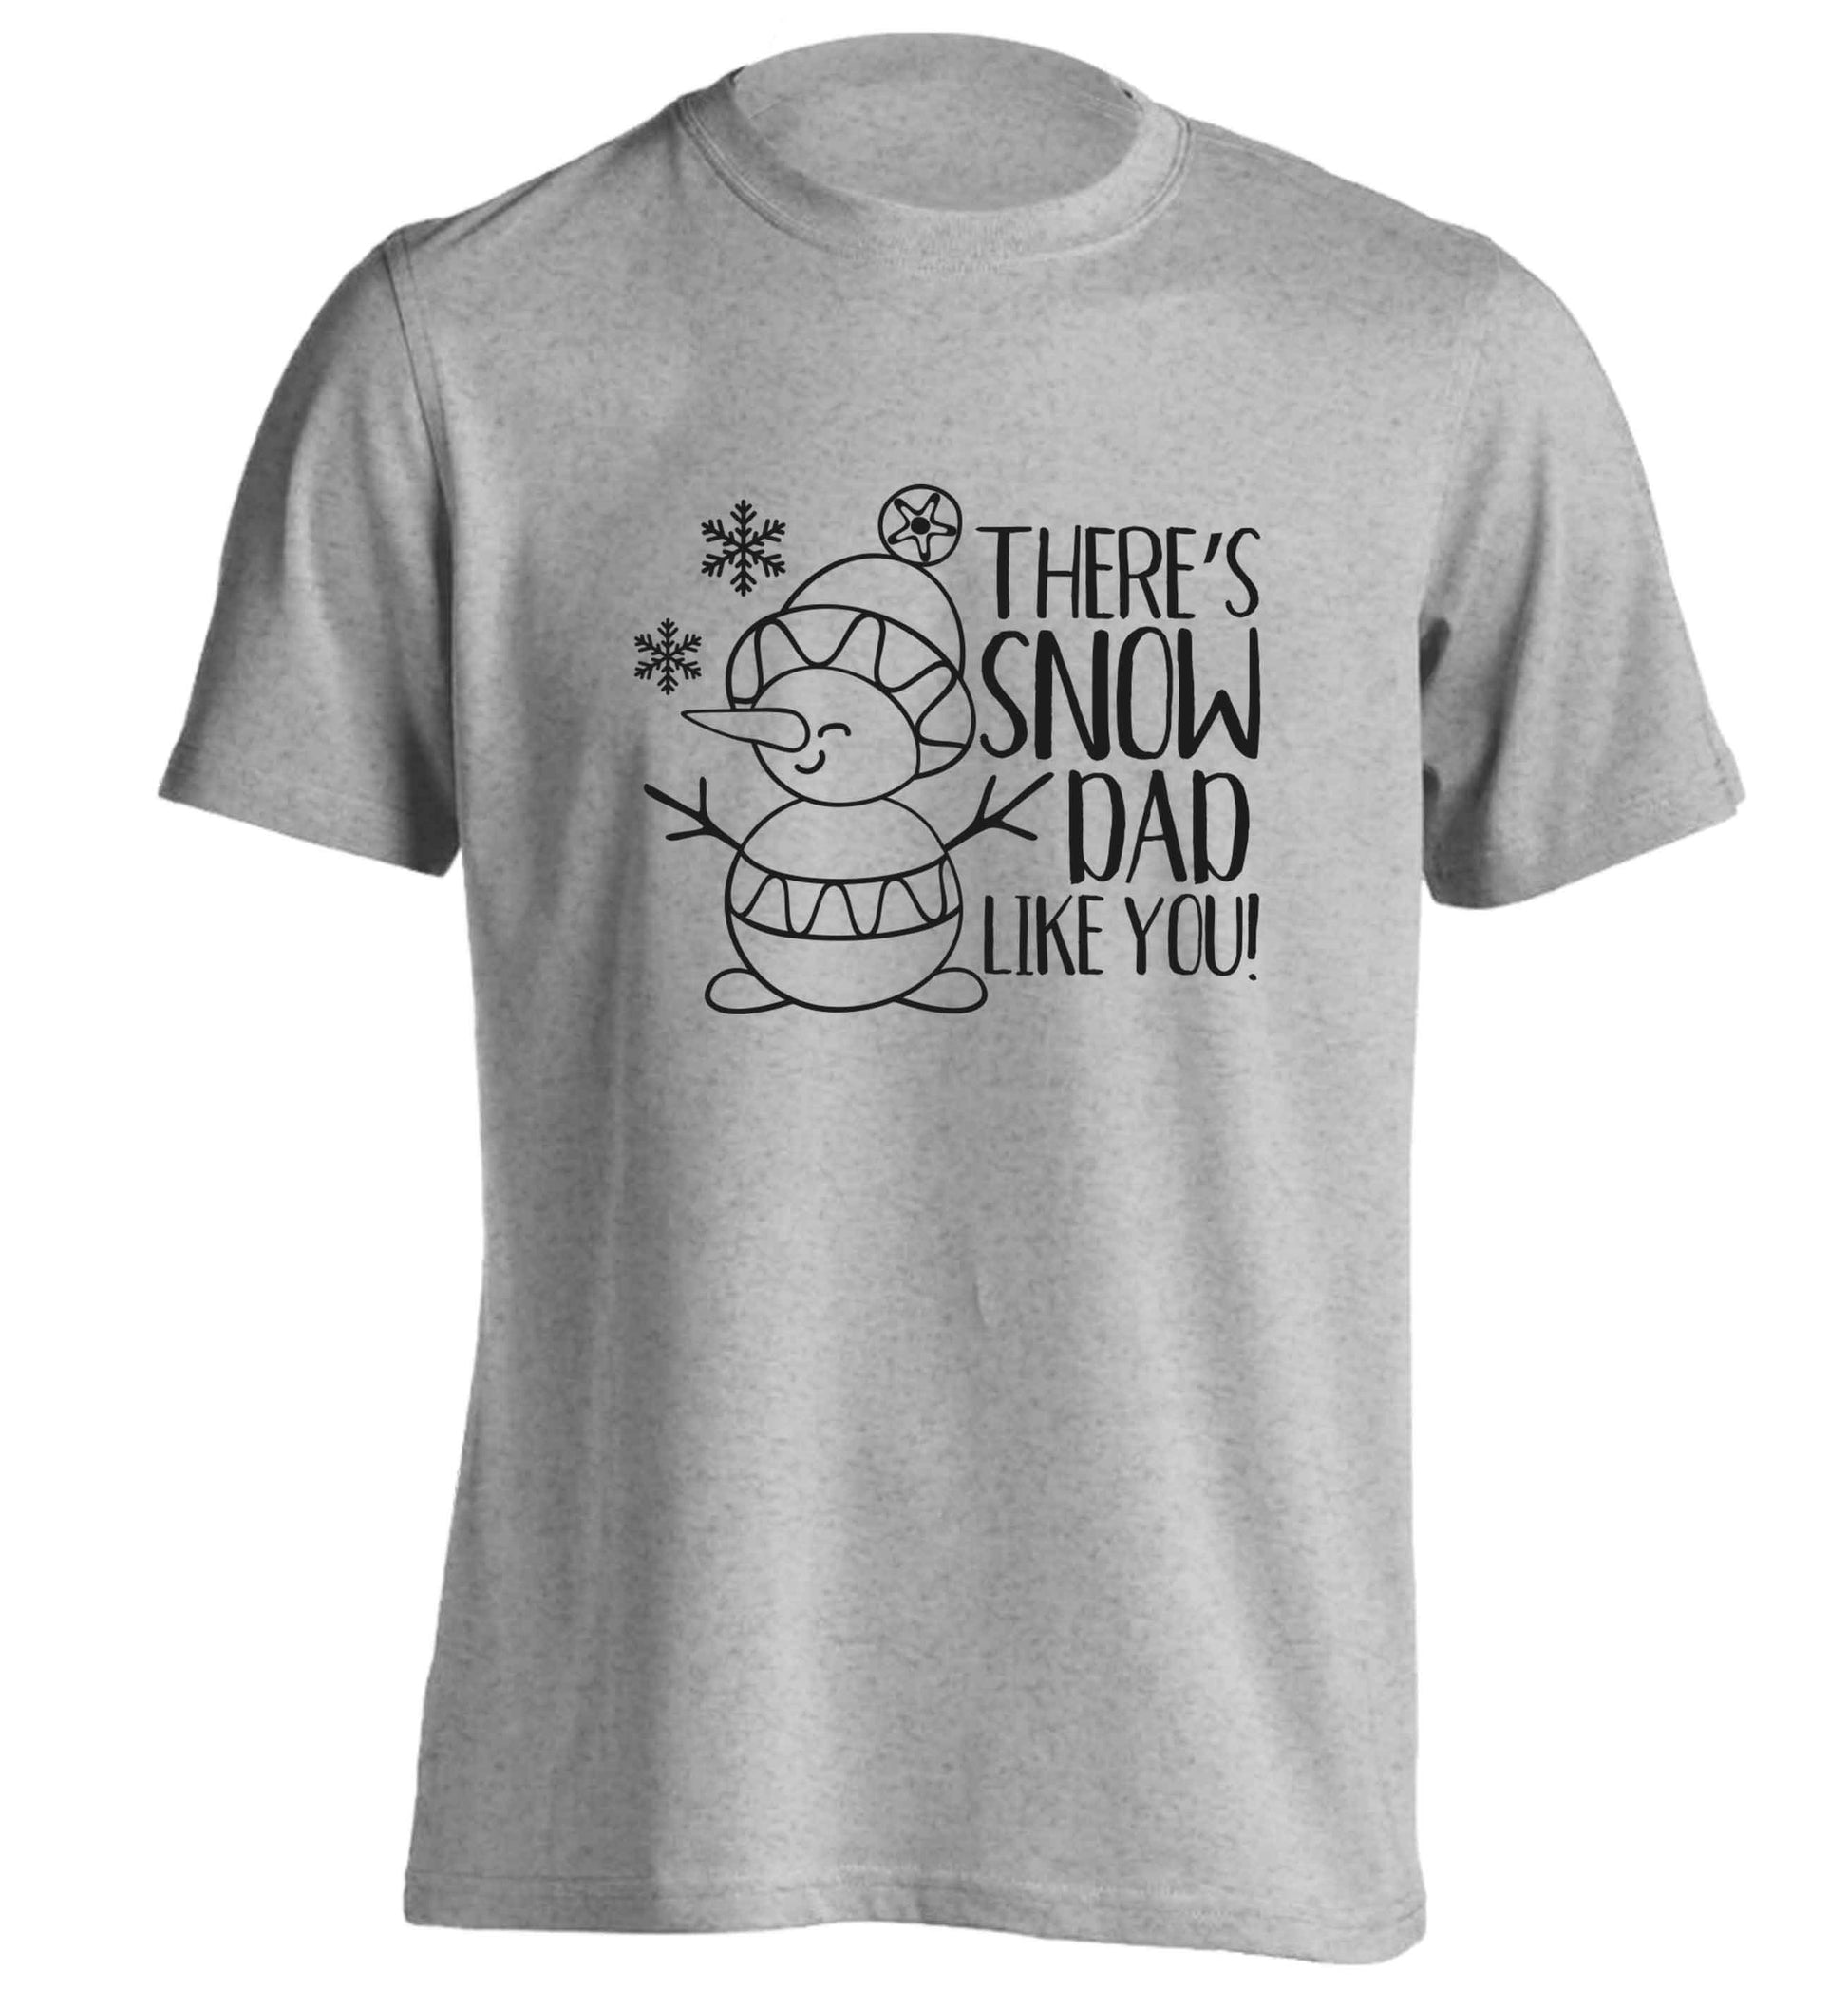 There's snow dad like you adults unisex grey Tshirt 2XL